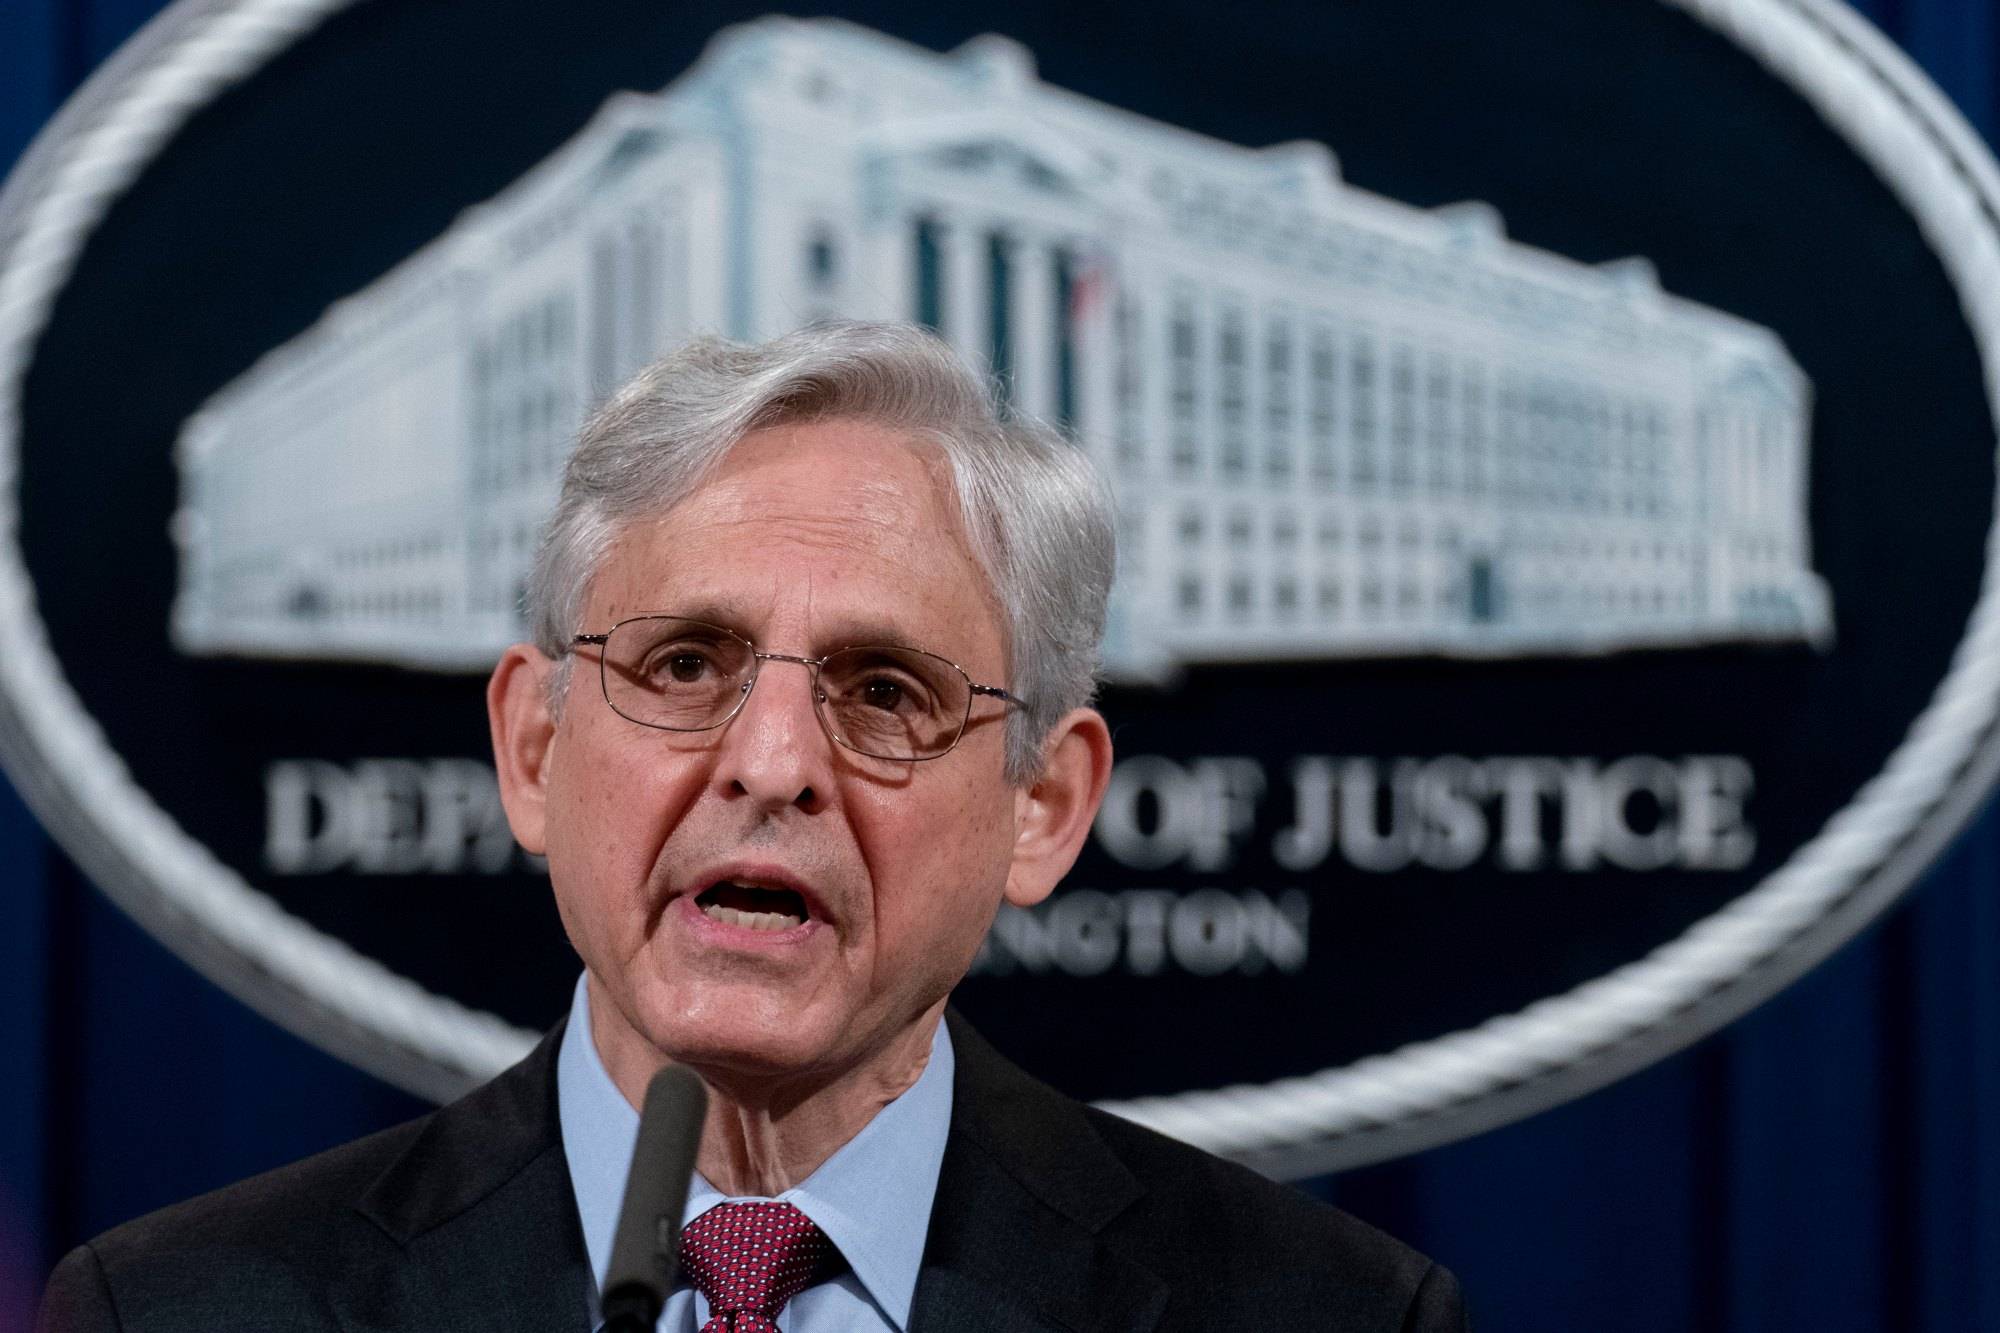 Attorney General Merrick Garland speaks about a jury’s verdict in the case against former Minneapolis Police Officer Derek Chauvin in the death of George Floyd, at the Department of Justice, Wednesday, April 21, 2021, in Washington. (AP Photo/Andrew Harnik, Pool)